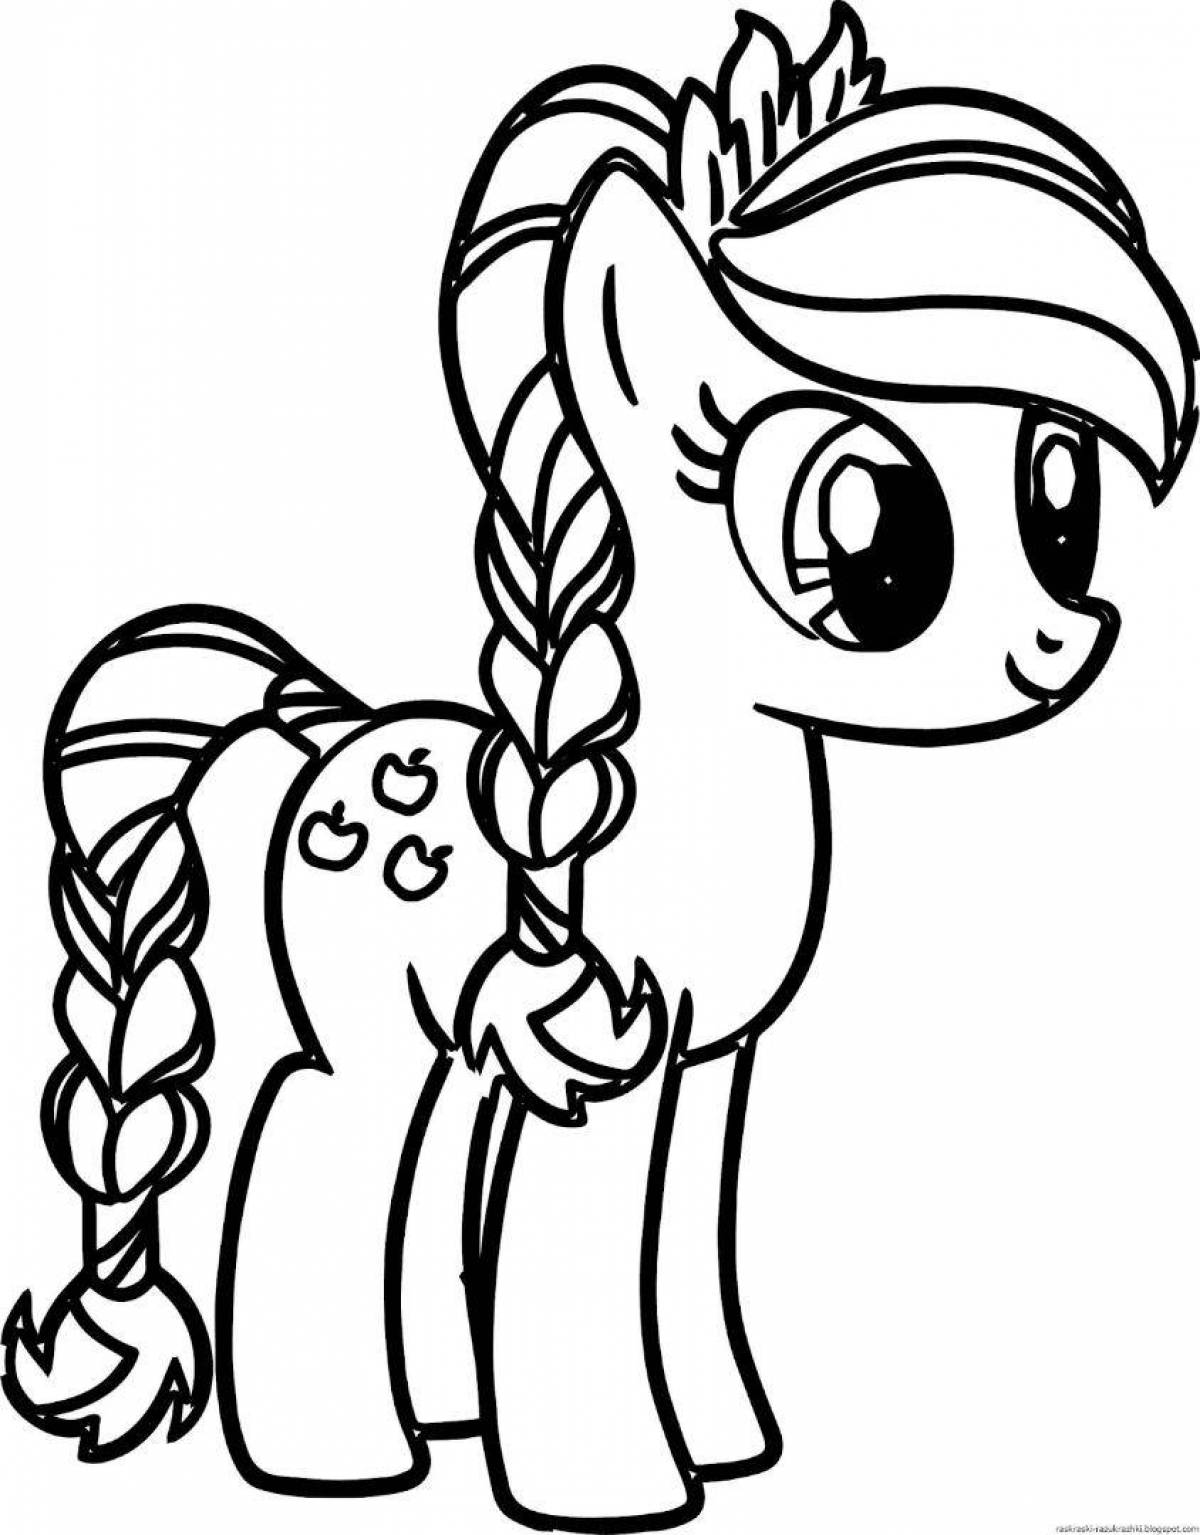 Glorious pony light coloring page